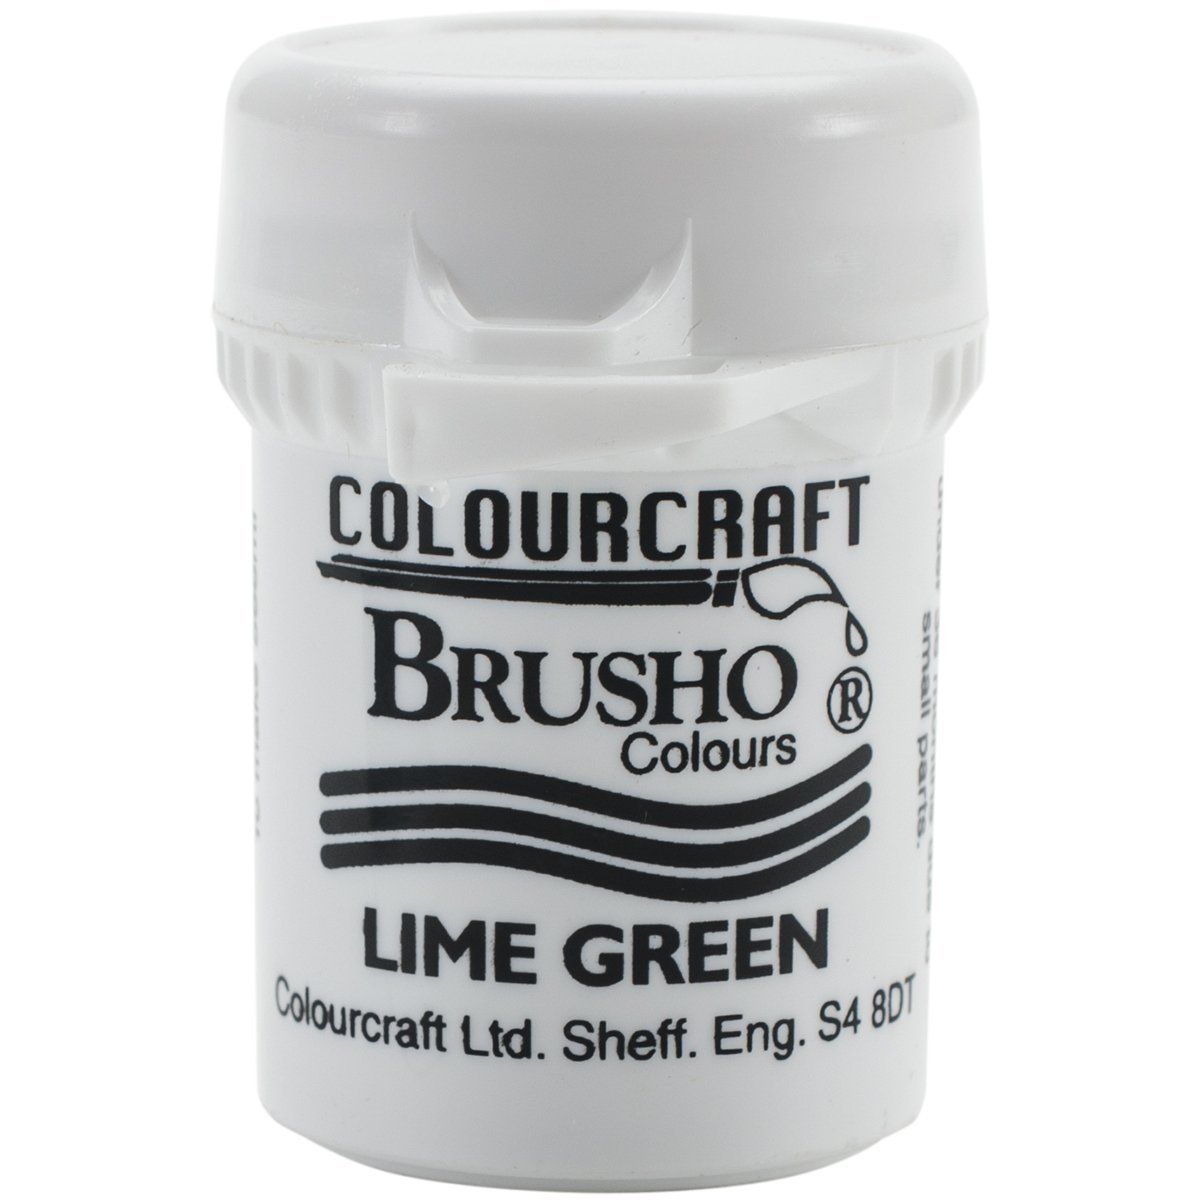 Brusho Crystal Colour - Lime Green 15 gm